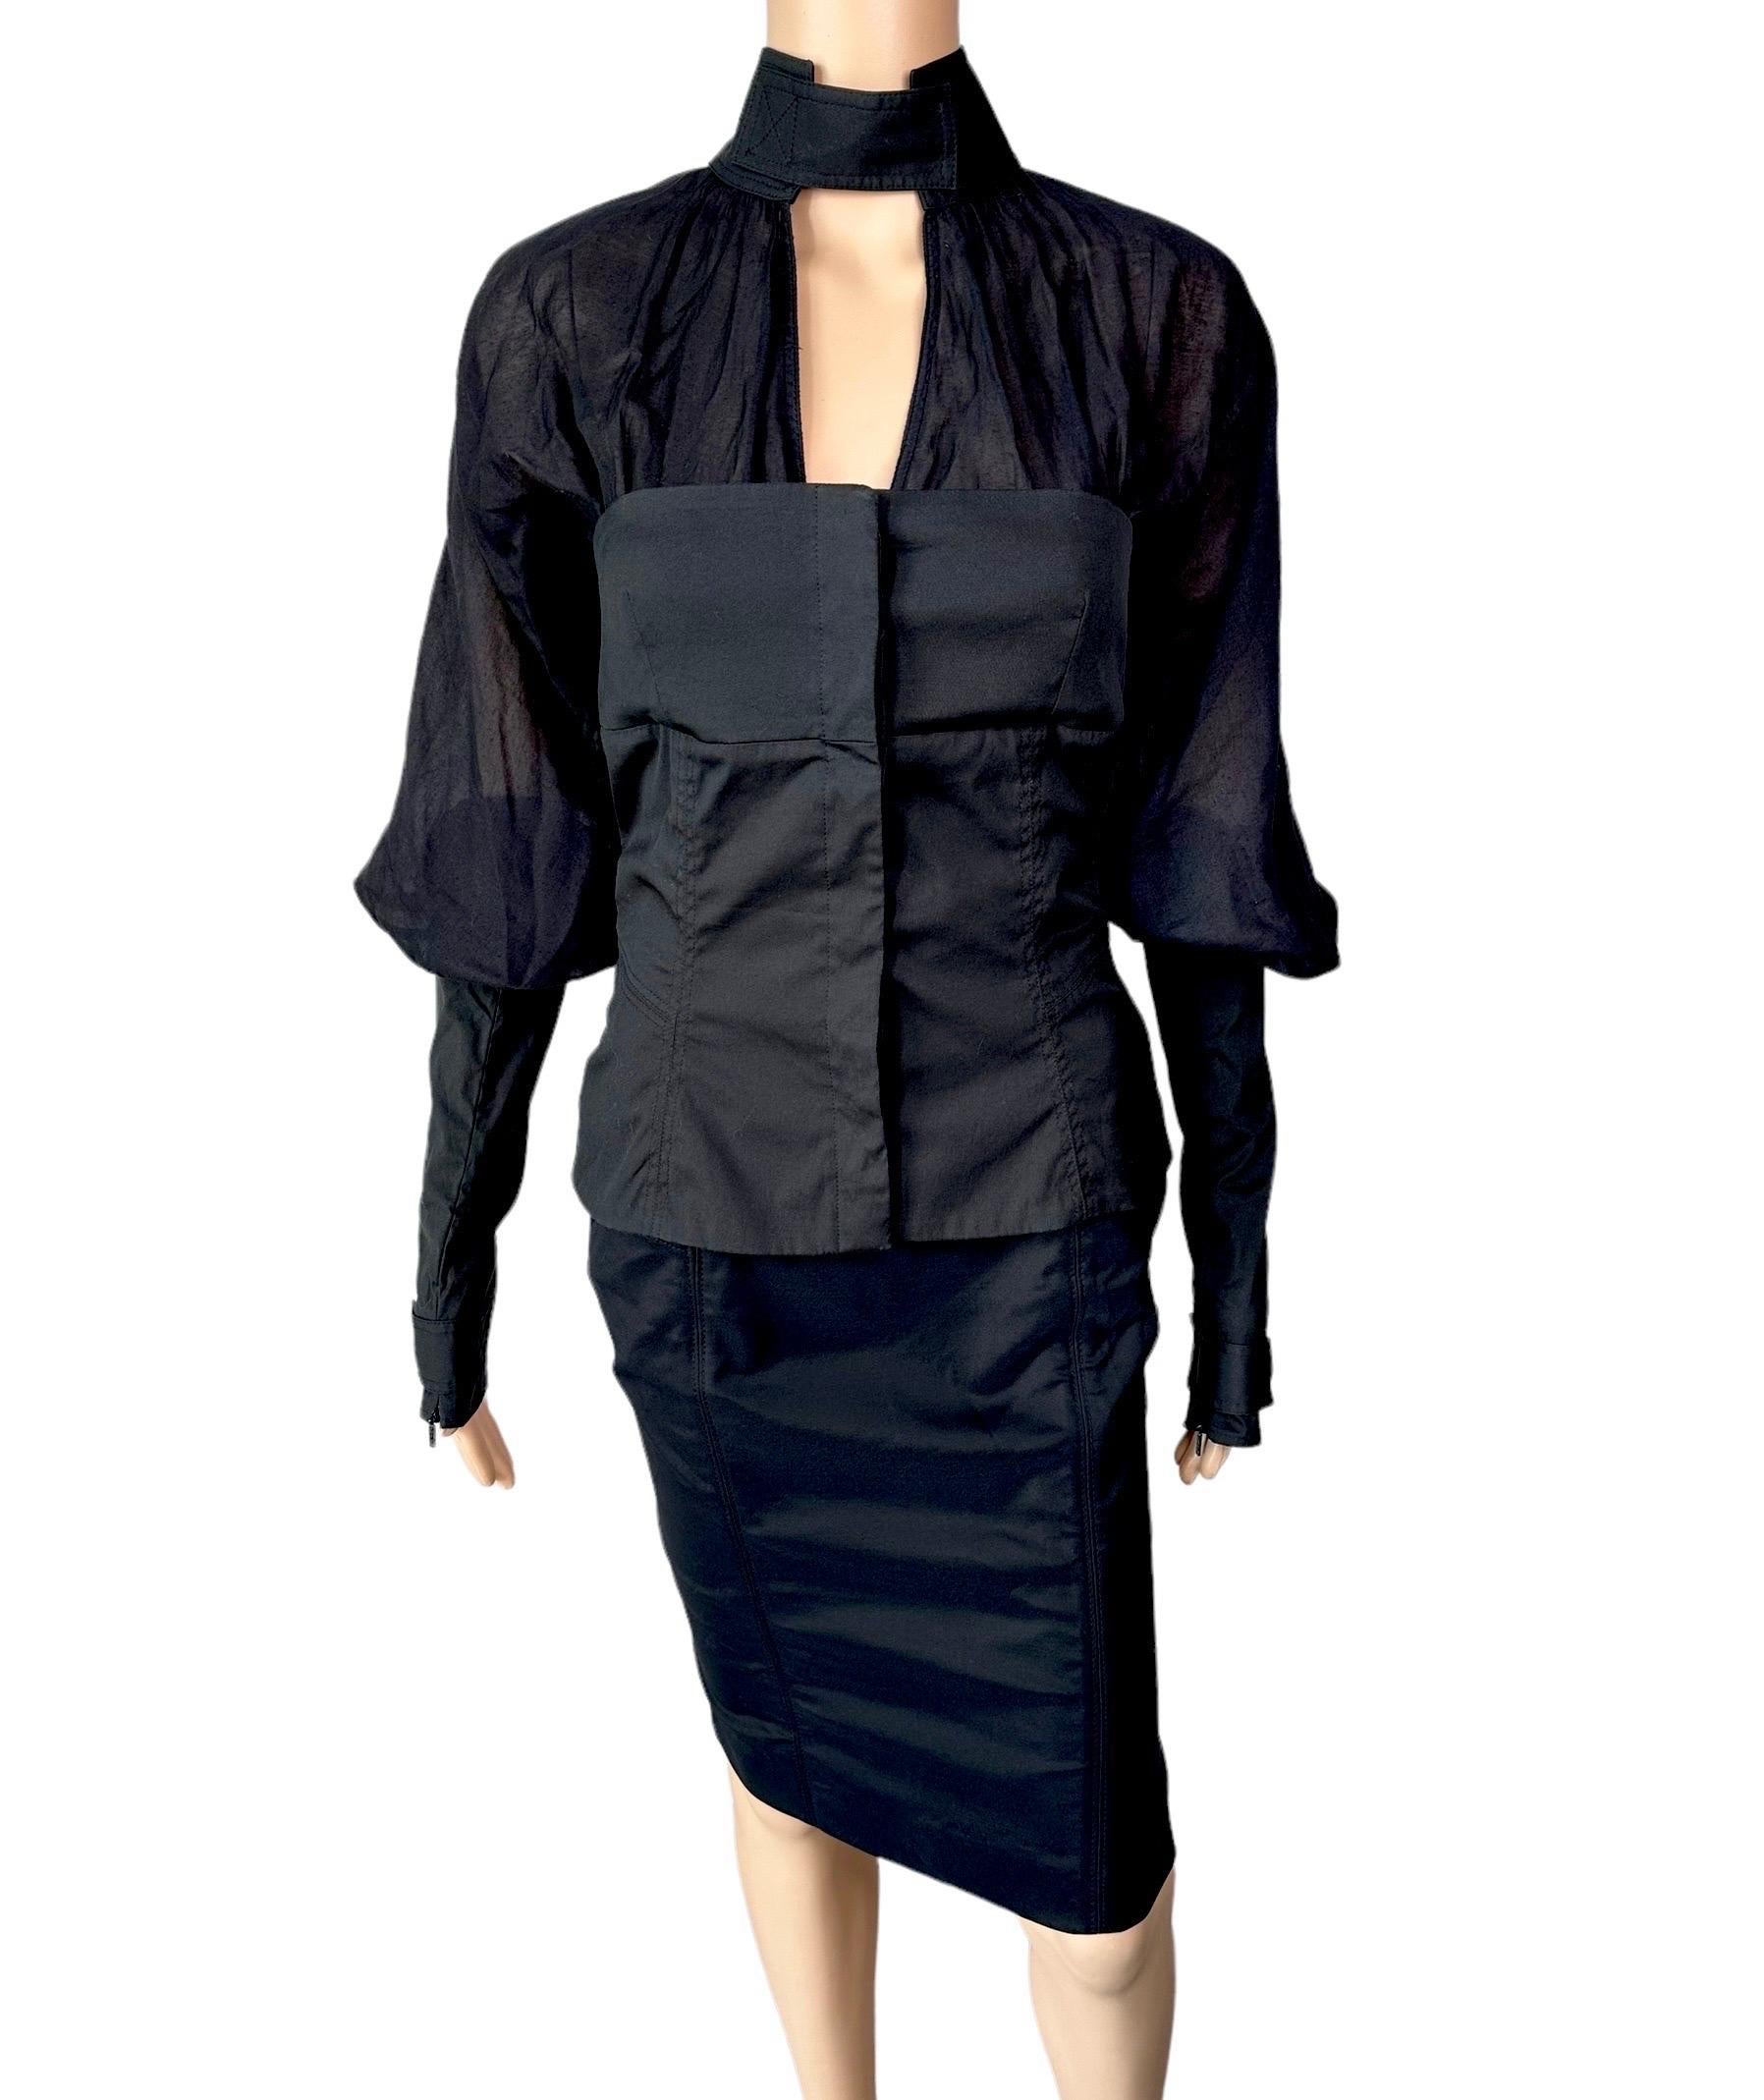 Tom Ford for Gucci F/W 2003 Jacket Top & Skirt Suit Black 2 Piece Set Ensemble In Good Condition For Sale In Naples, FL